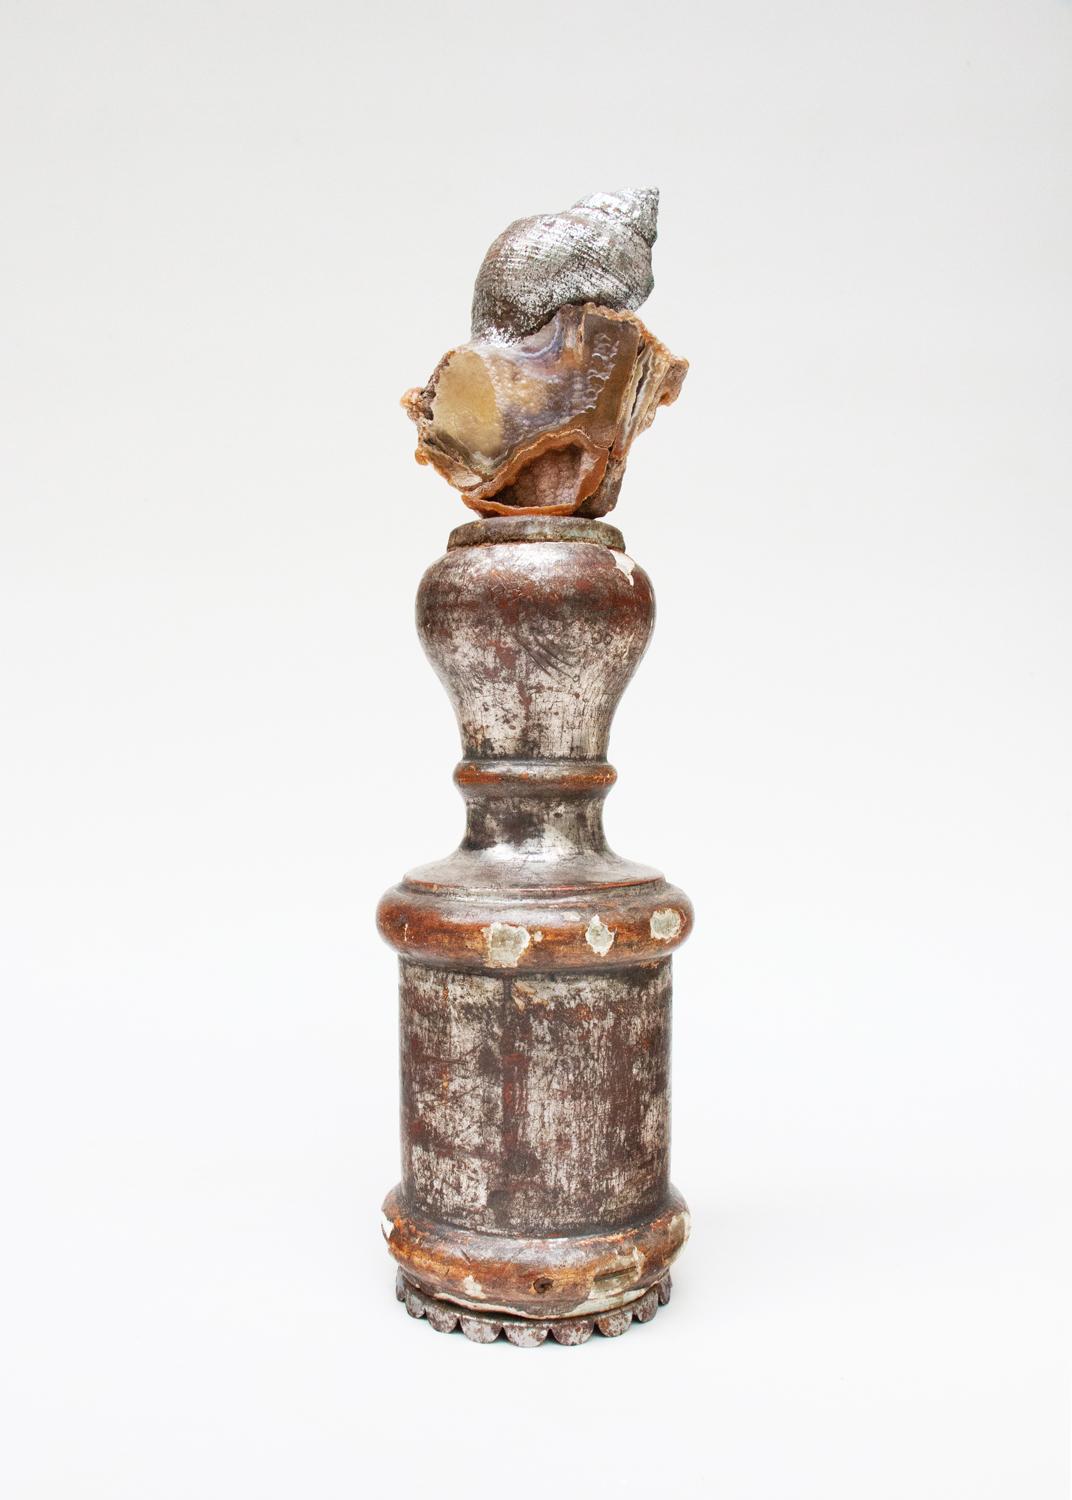 Sculptural 18th century Italian candlestick top fragment with polished agate coral and a coordinating silver-leaf shell. 

The hand-carved, 18th century silver candlestick top originally came from a candlestick from a church in Tuscany. It is